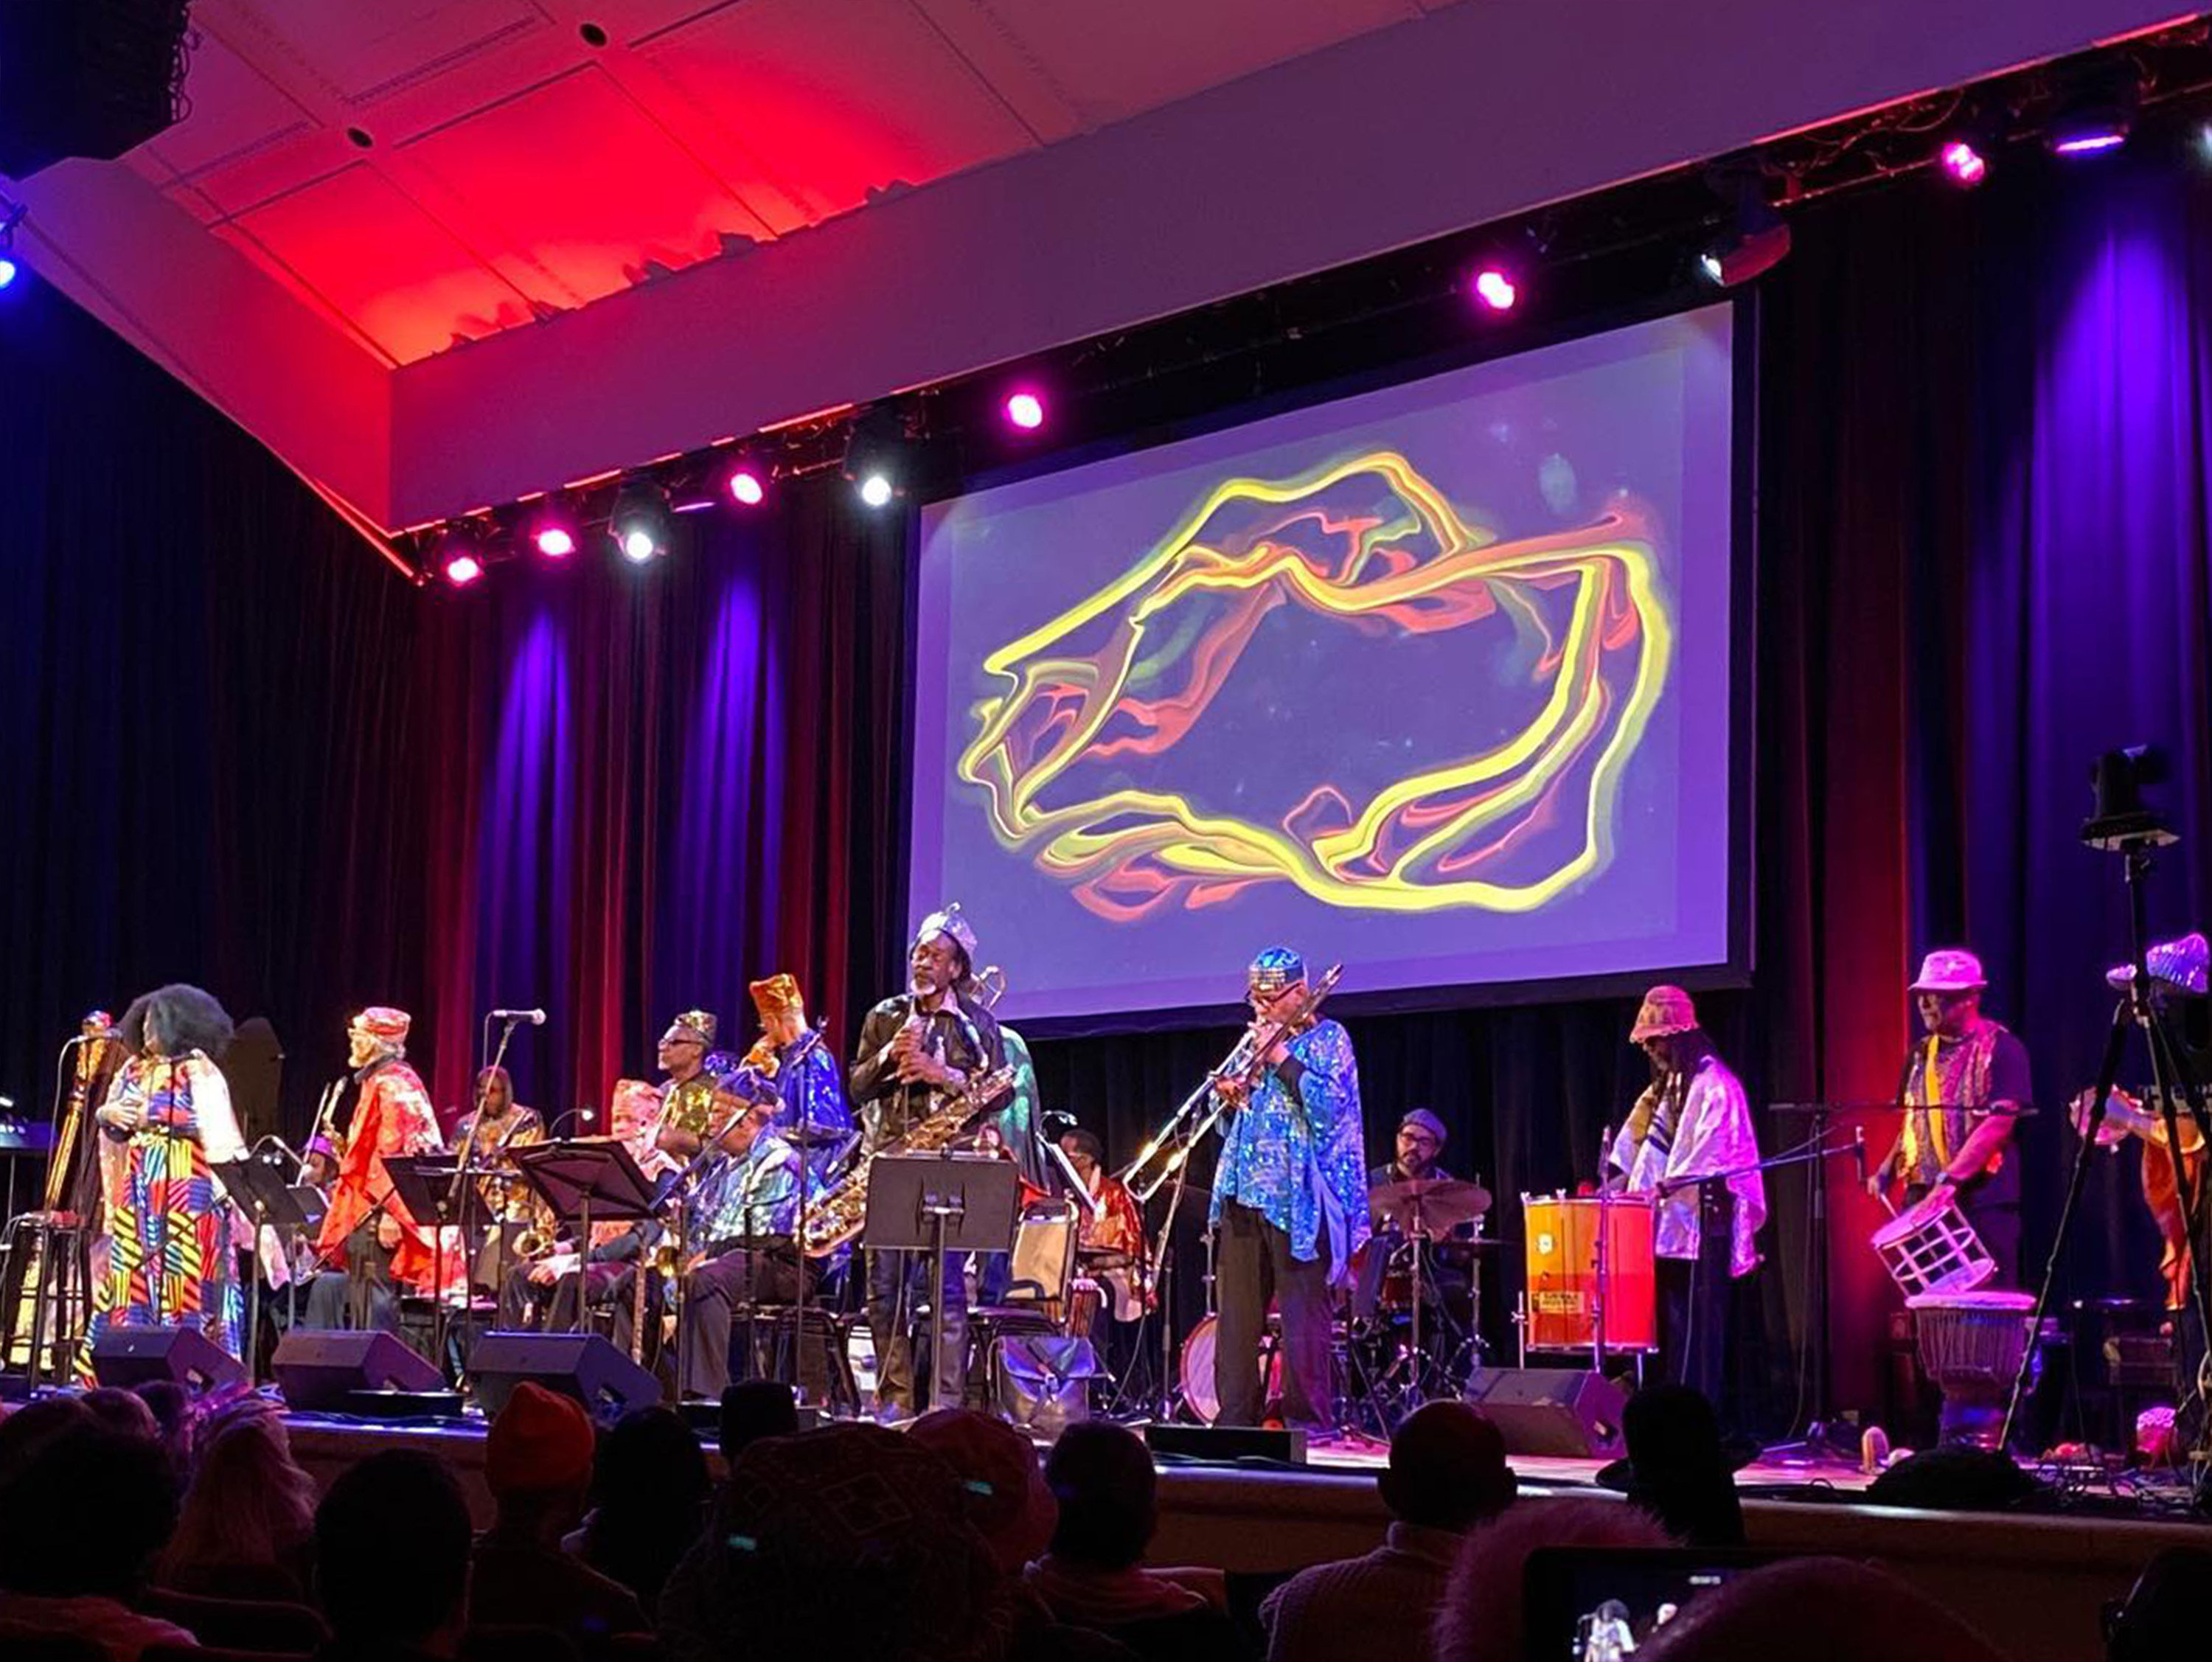 Sun Ra Arkestra with live painting photo by Cecile Chong